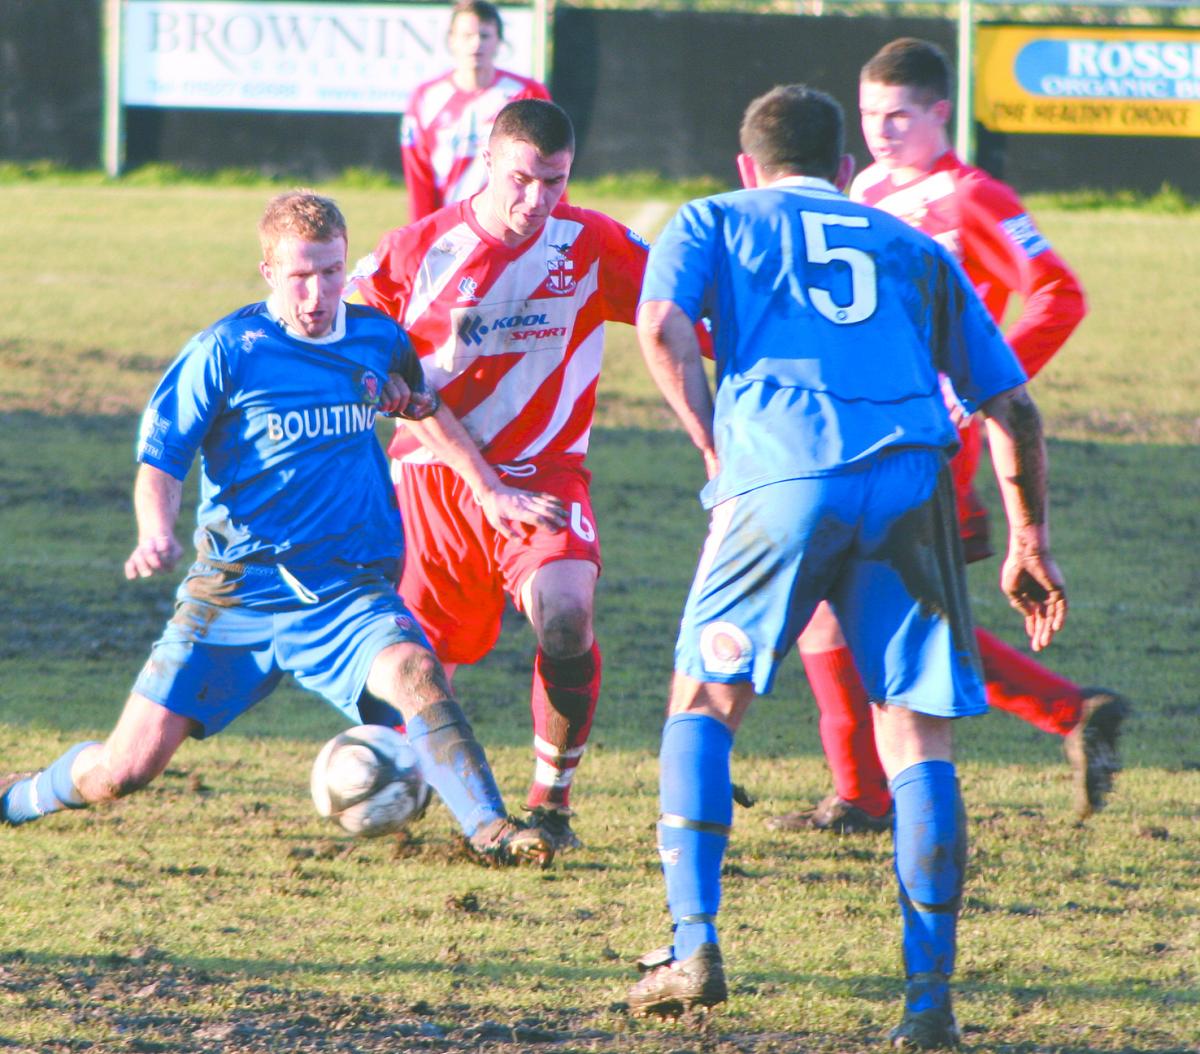 Redditch lose heavily at home